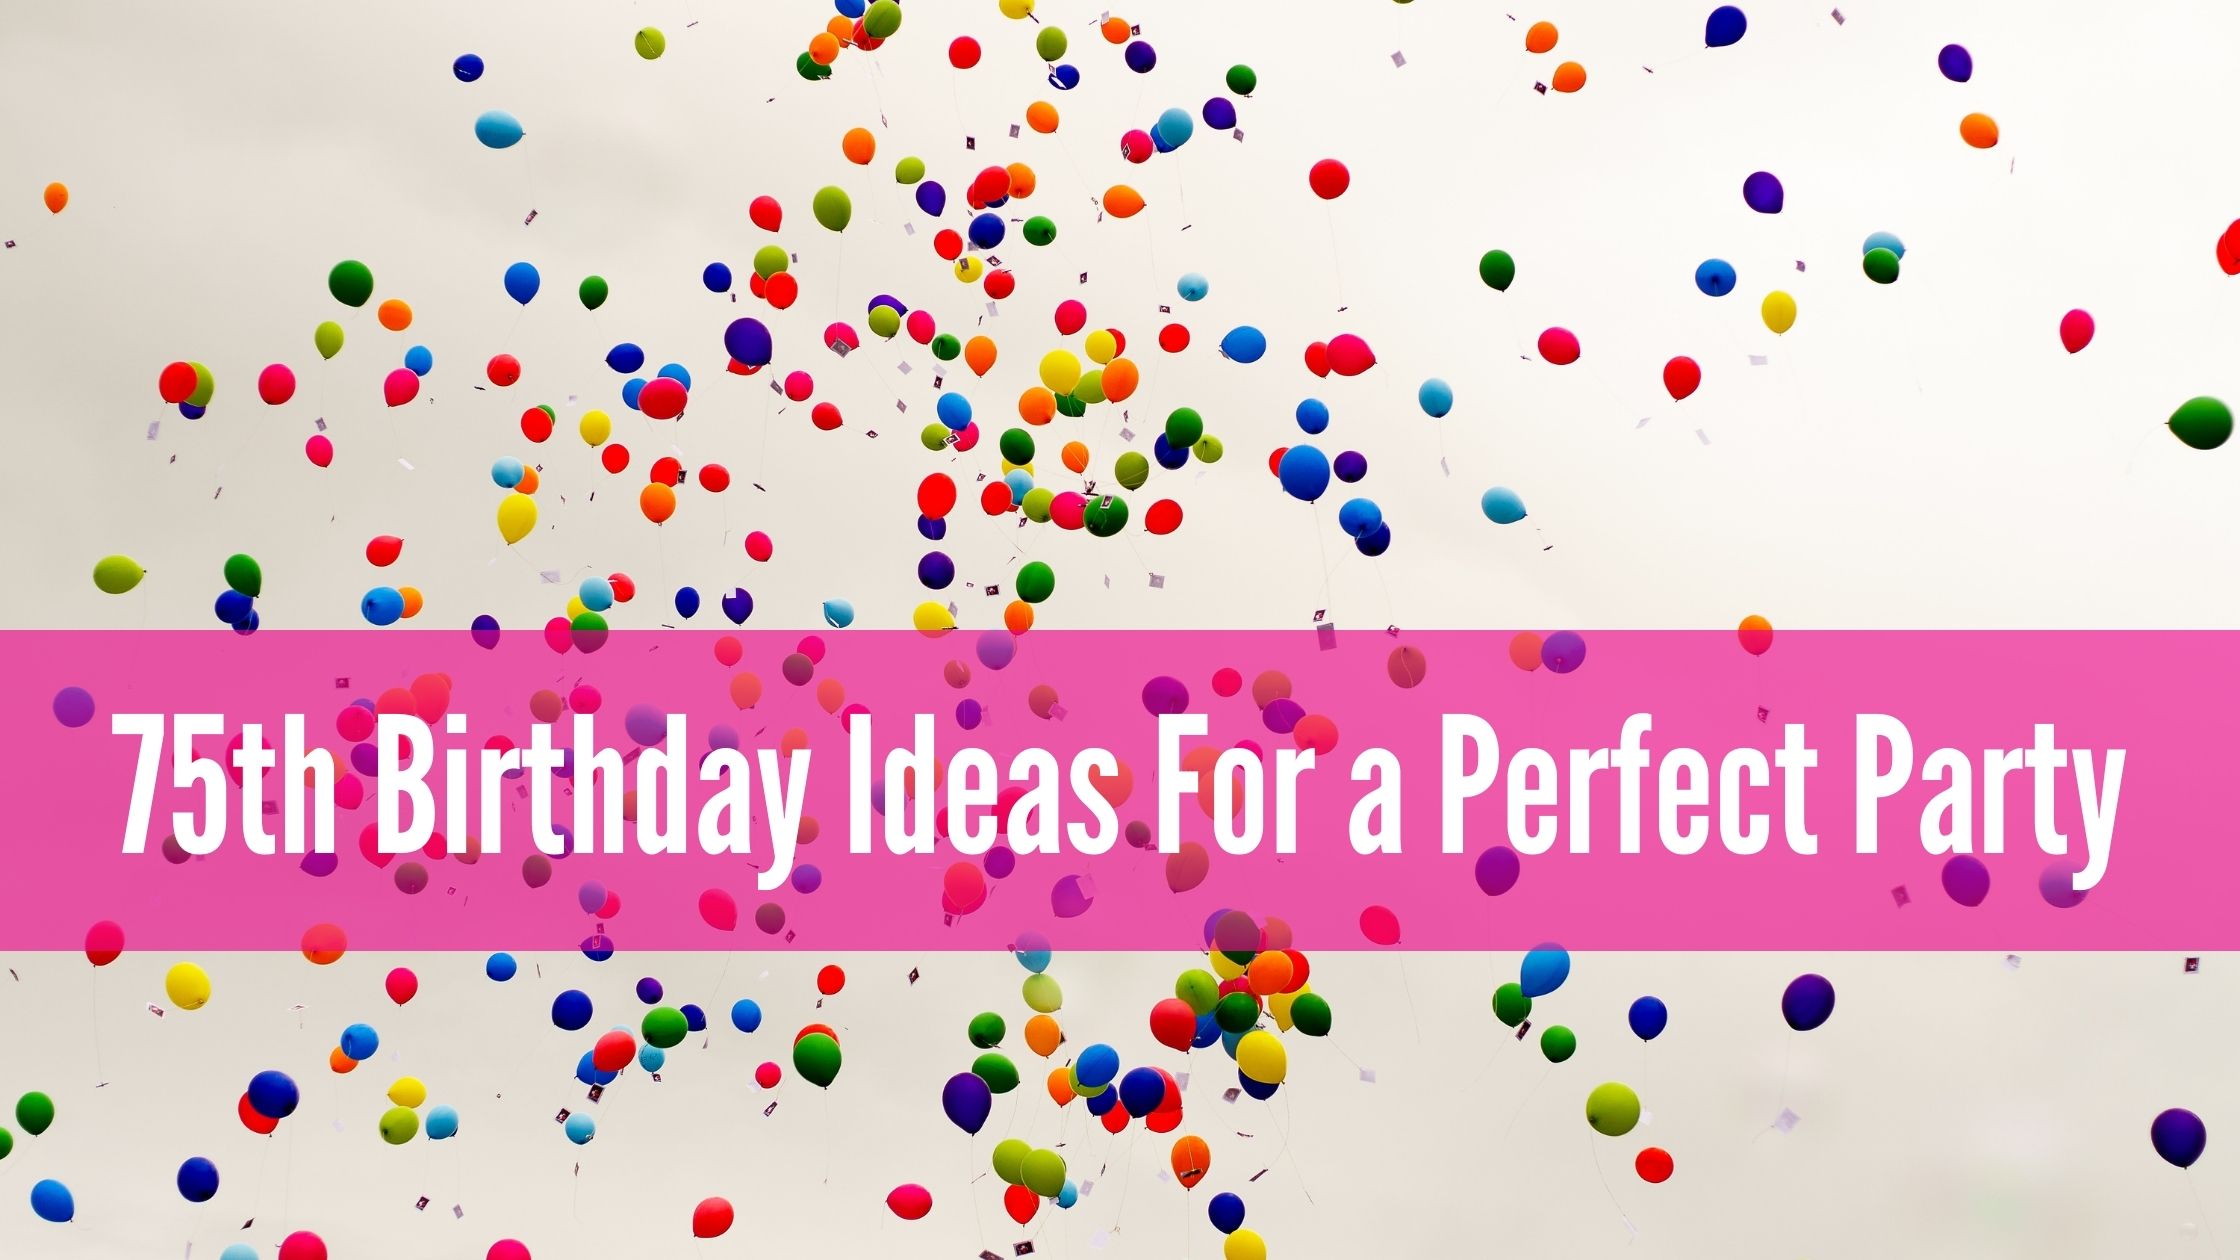 75th Birthday Ideas For a Perfect Party